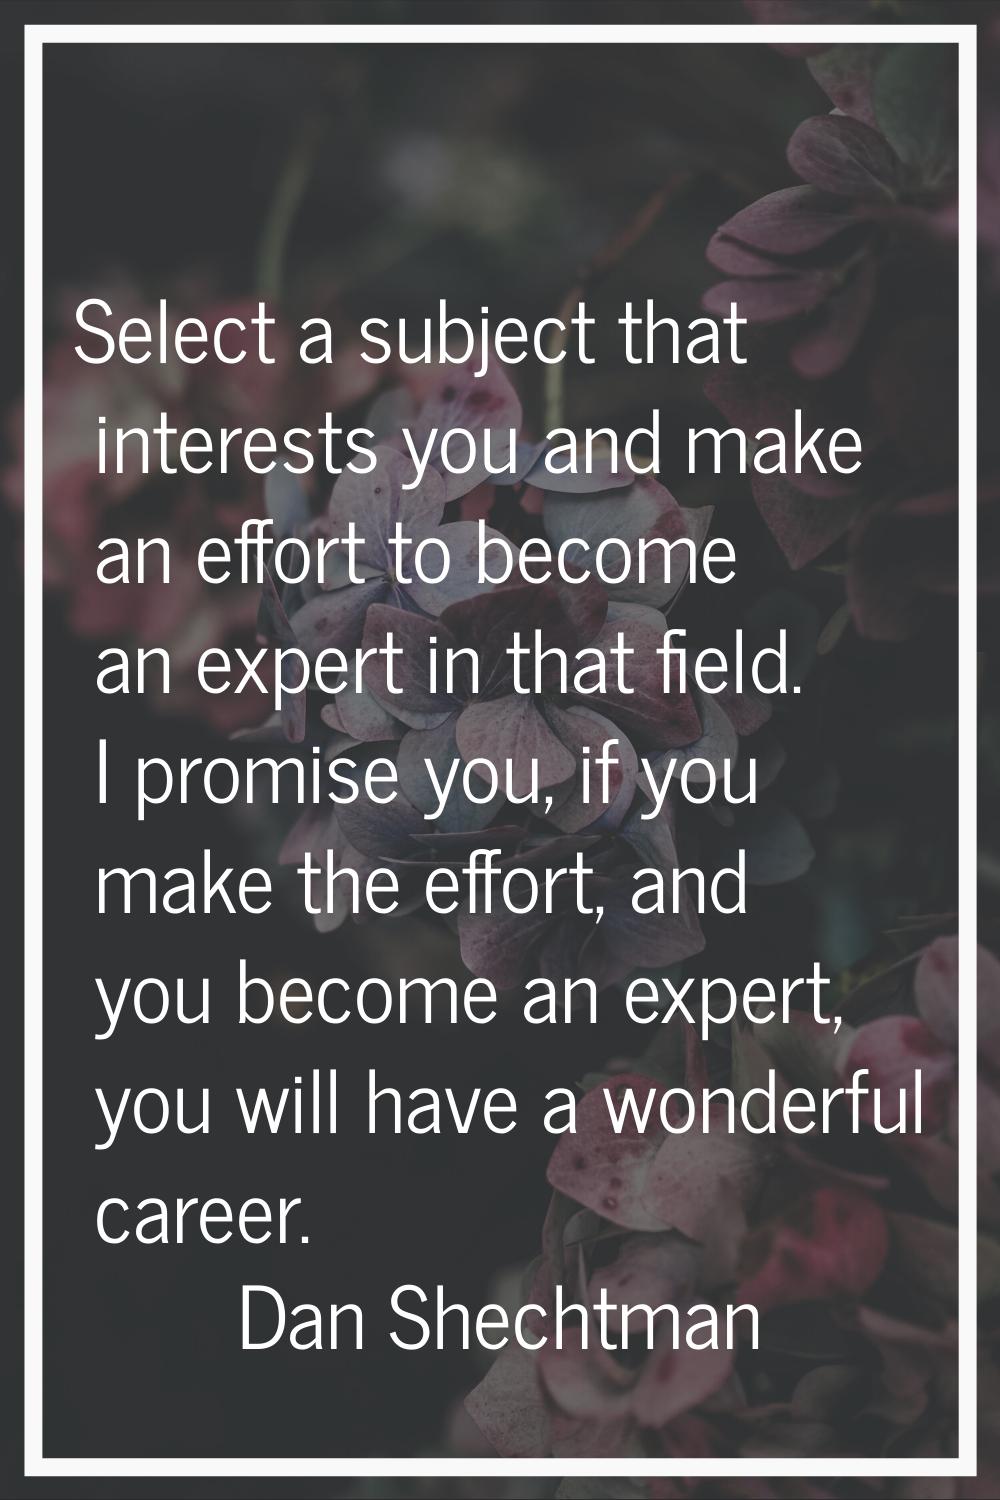 Select a subject that interests you and make an effort to become an expert in that field. I promise